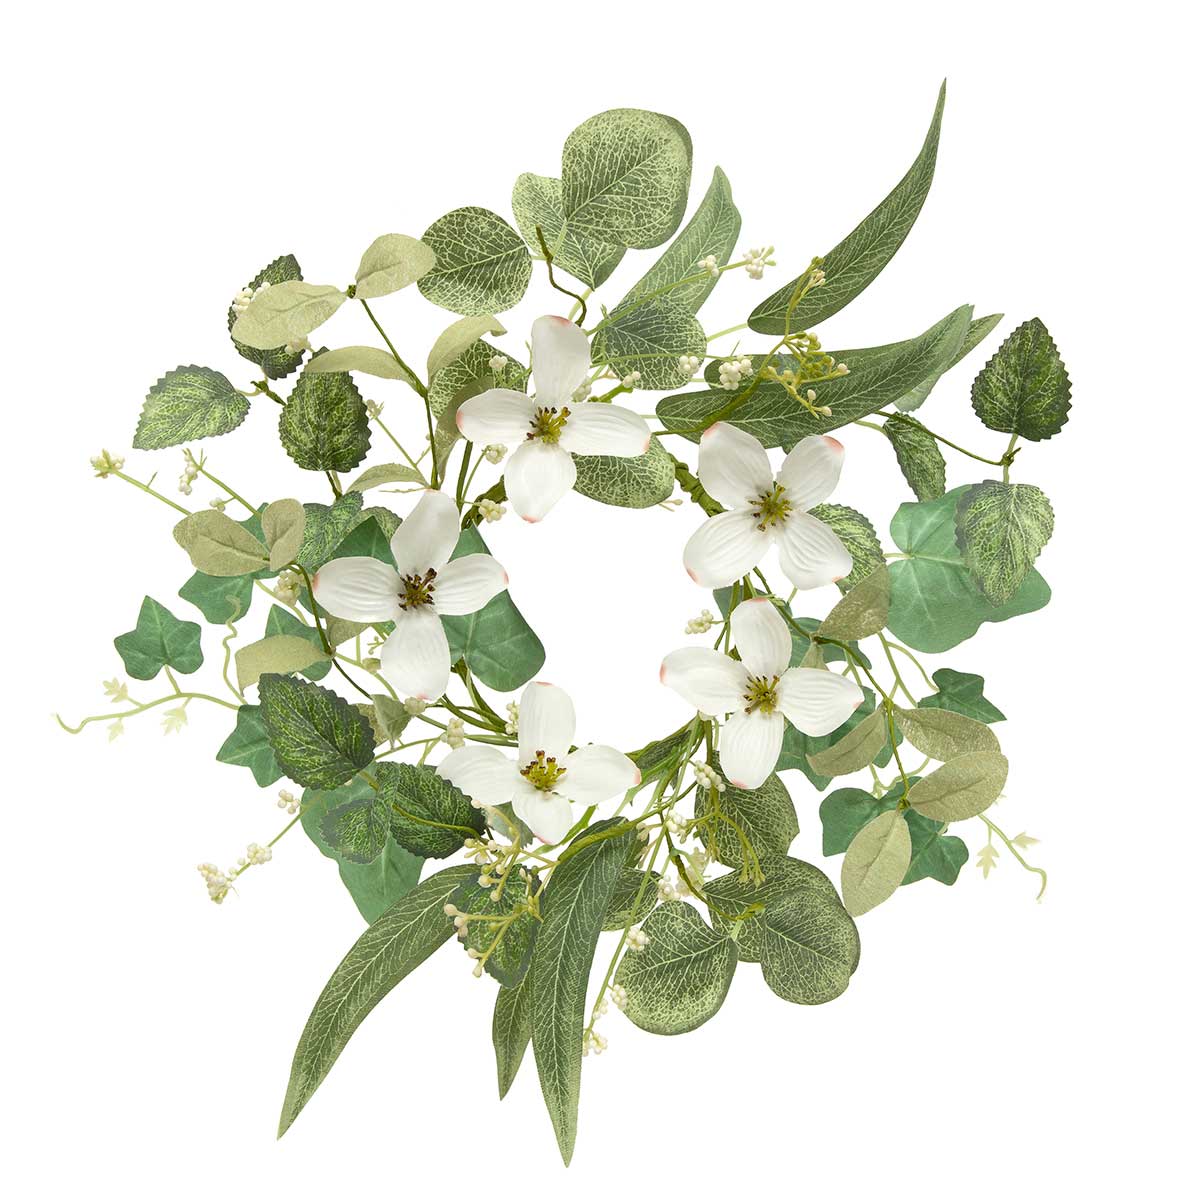 MINI WREATH DOGWOOD/BERRY 14IN (INNER RING 5IN) POLYESTER - Click Image to Close